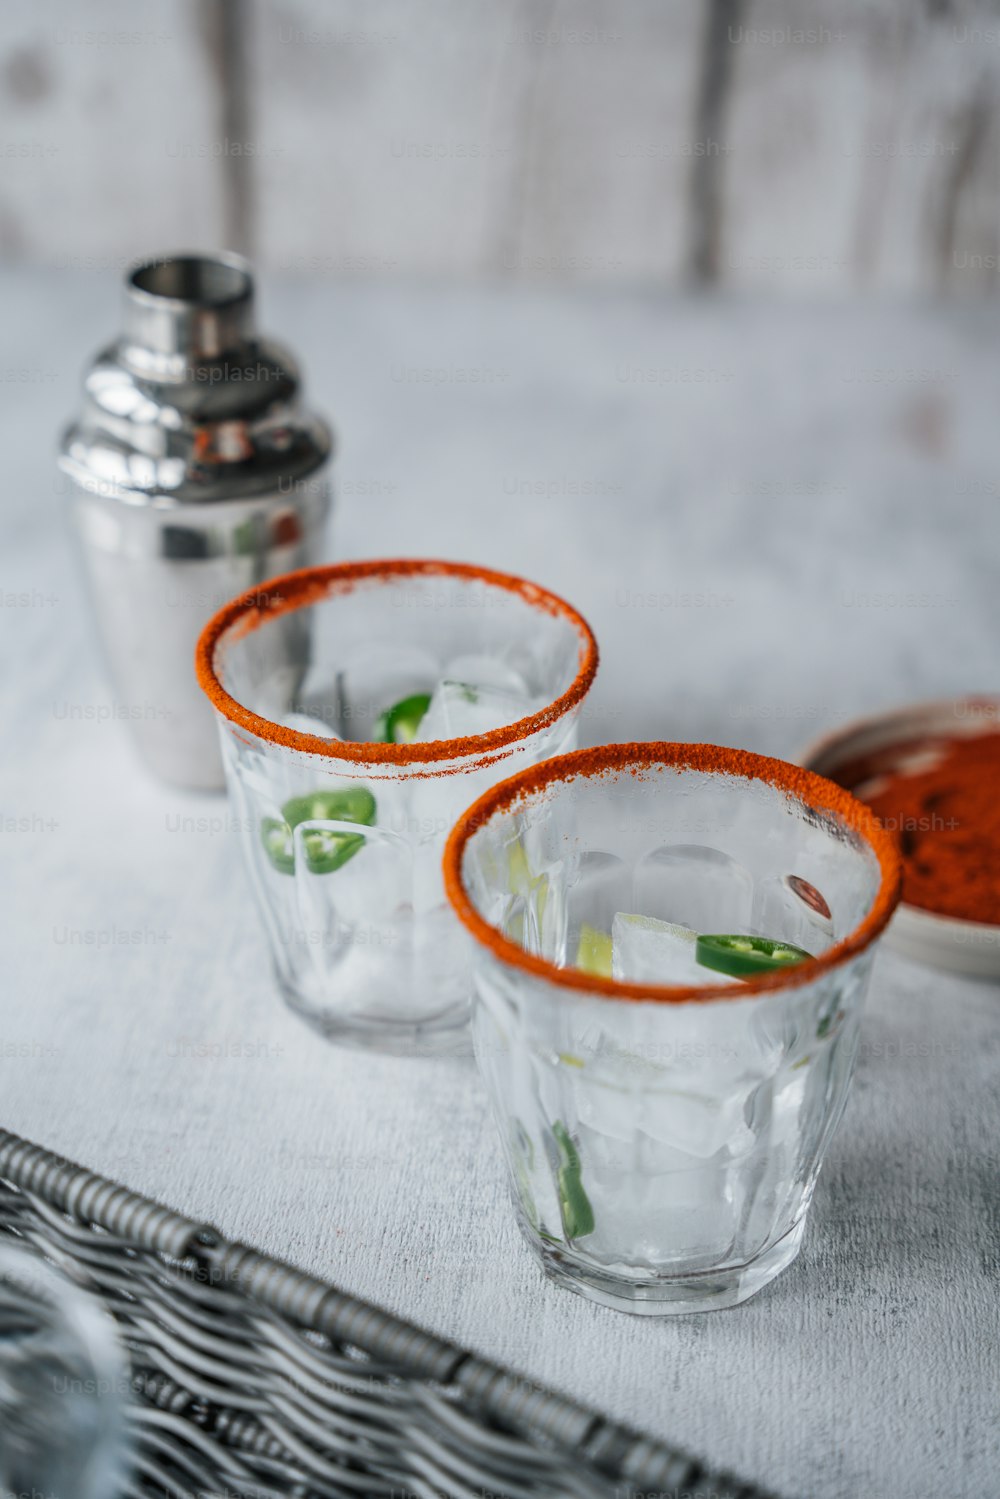 three shot glasses with orange rims on a table